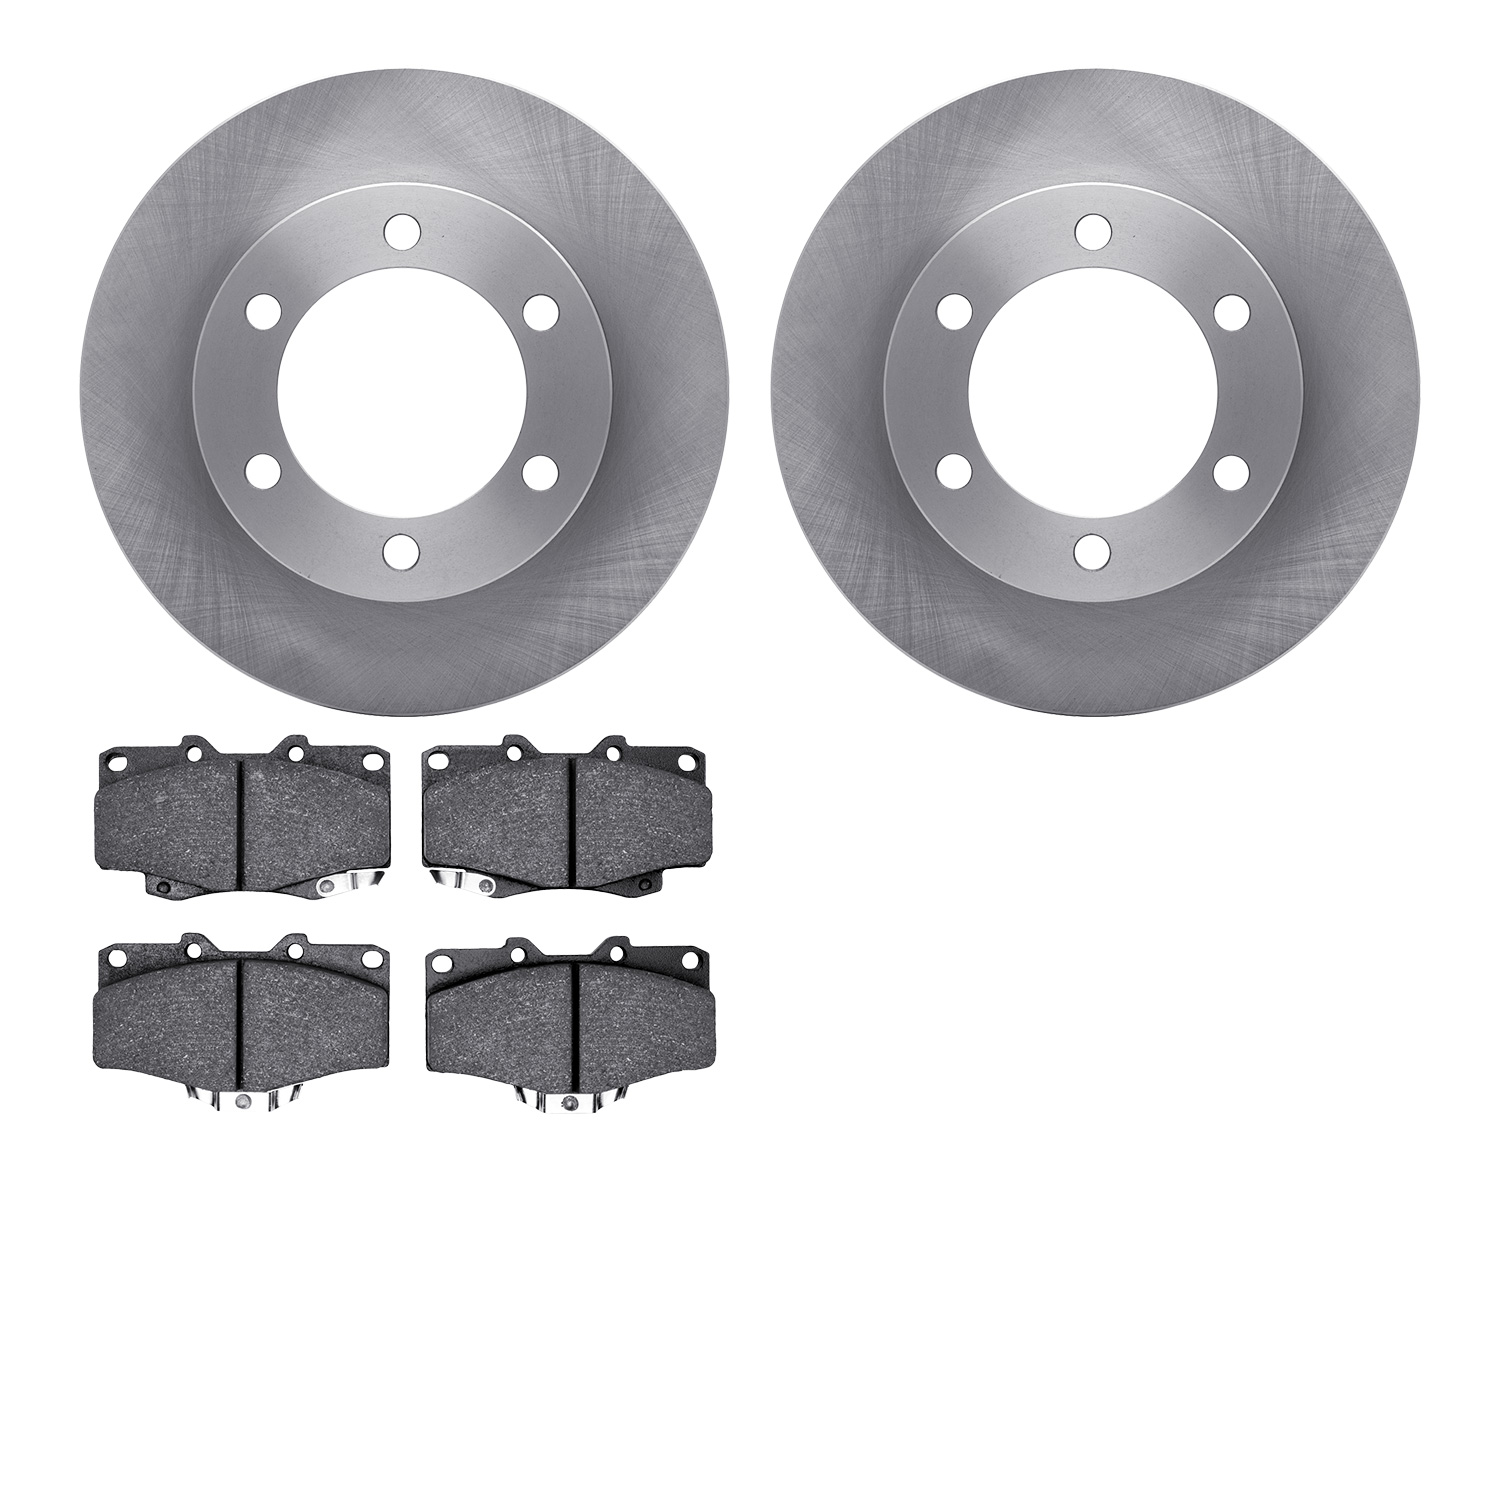 6402-76034 Brake Rotors with Ultimate-Duty Brake Pads, 1995-2004 Lexus/Toyota/Scion, Position: Front